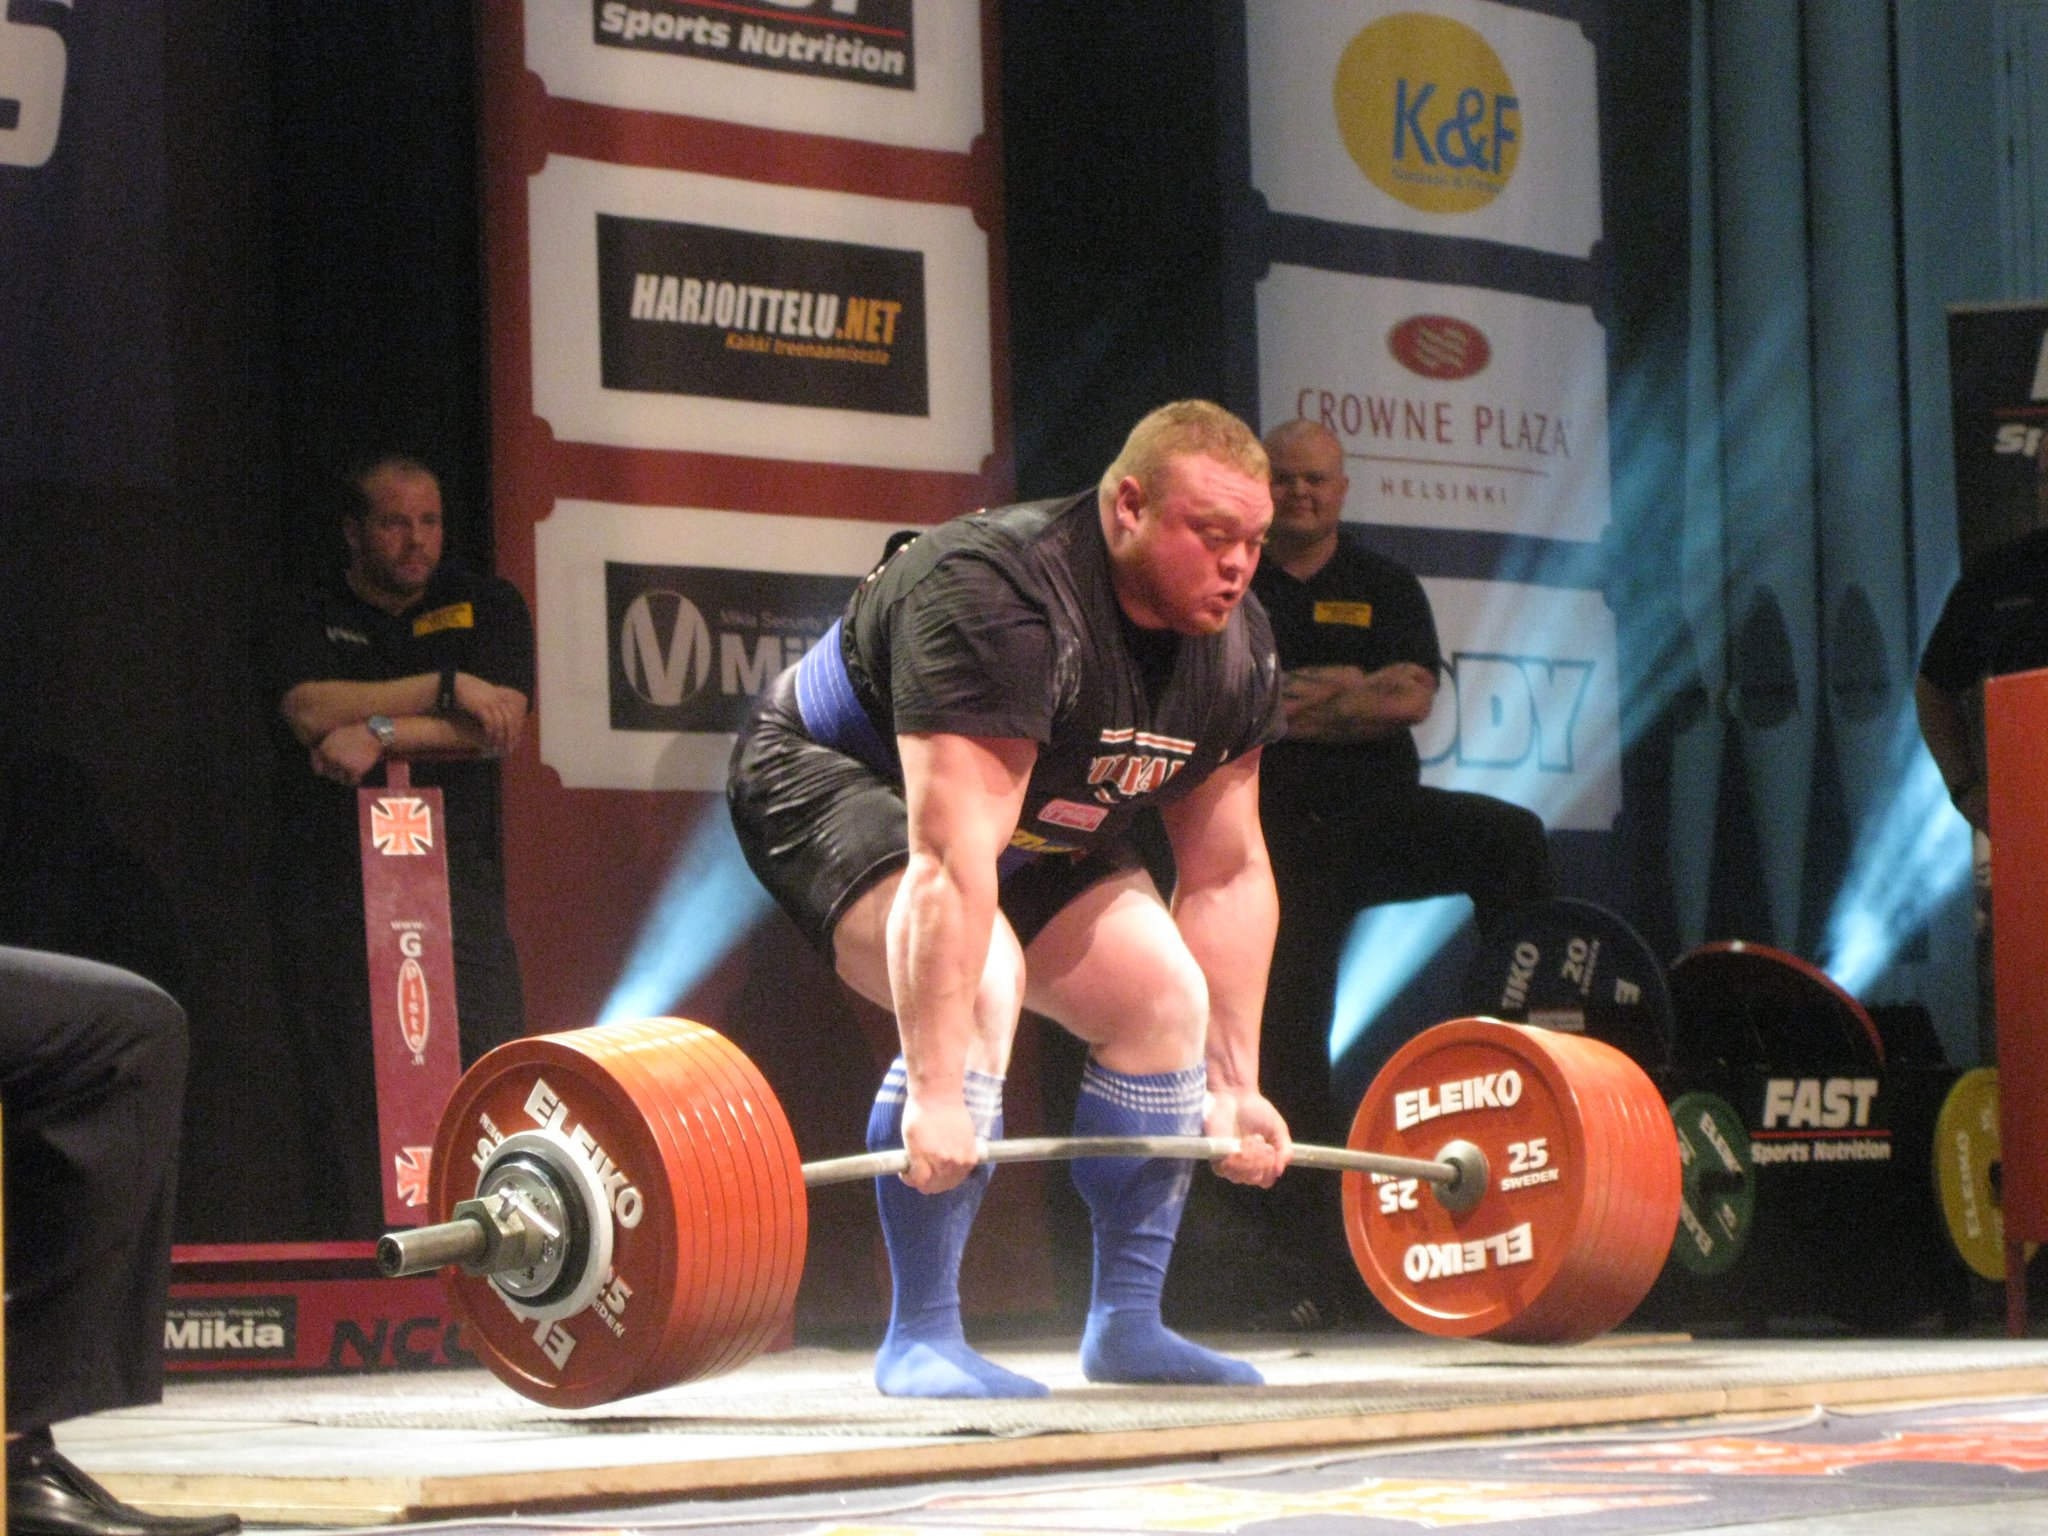 The world record deadlift of 1015 pounds, done by Benedikt Magnusson, was performed raw and is possibly the greatest strength feat of all time.